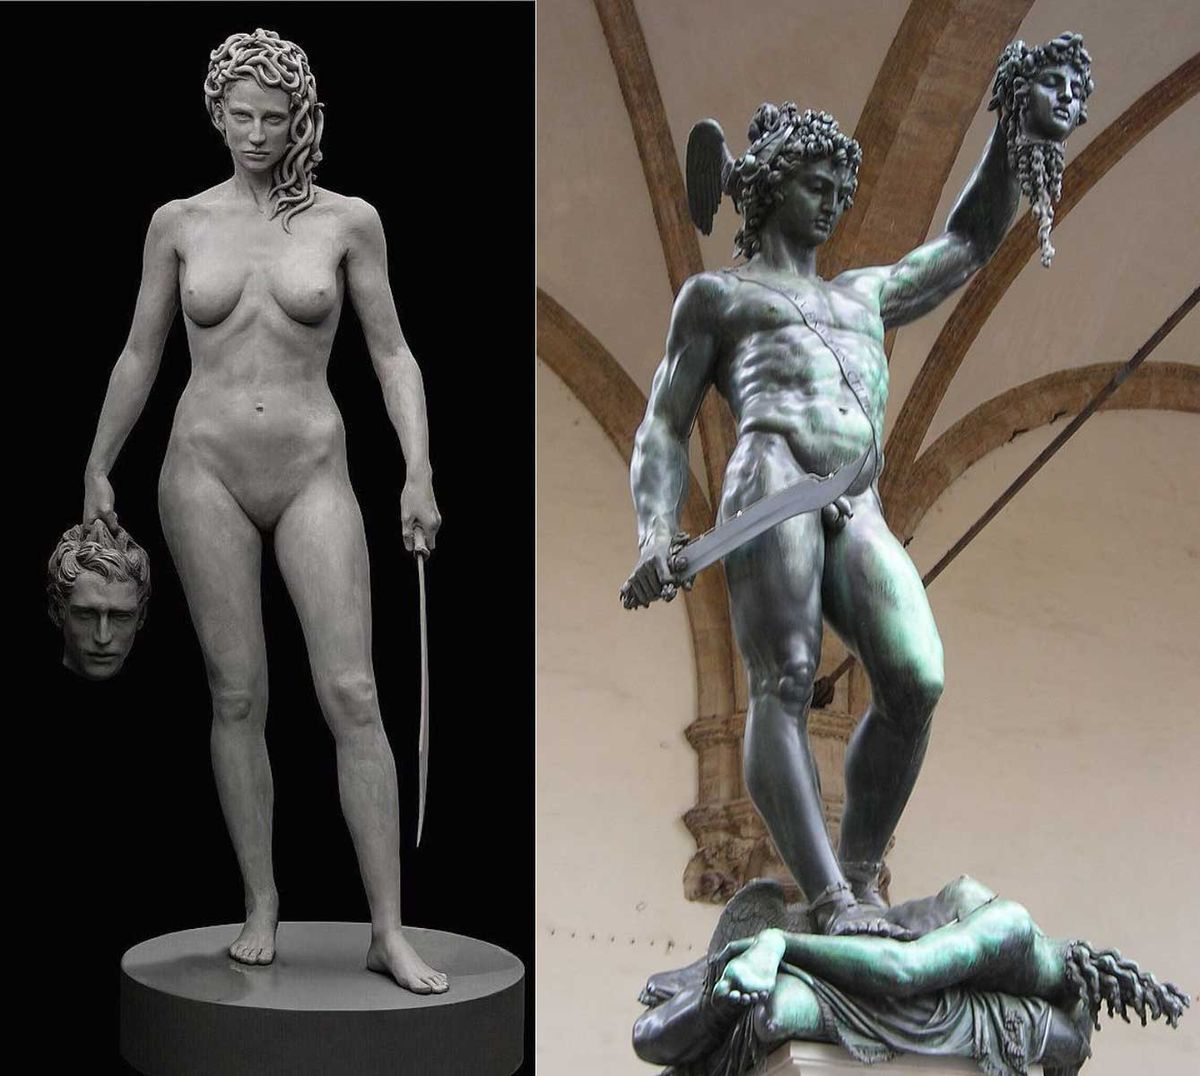 Luciano Garbati's sculpture Medusa With The Head of Perseus directly responds to Benvenuto Cellin’s more traditional take on the legend 